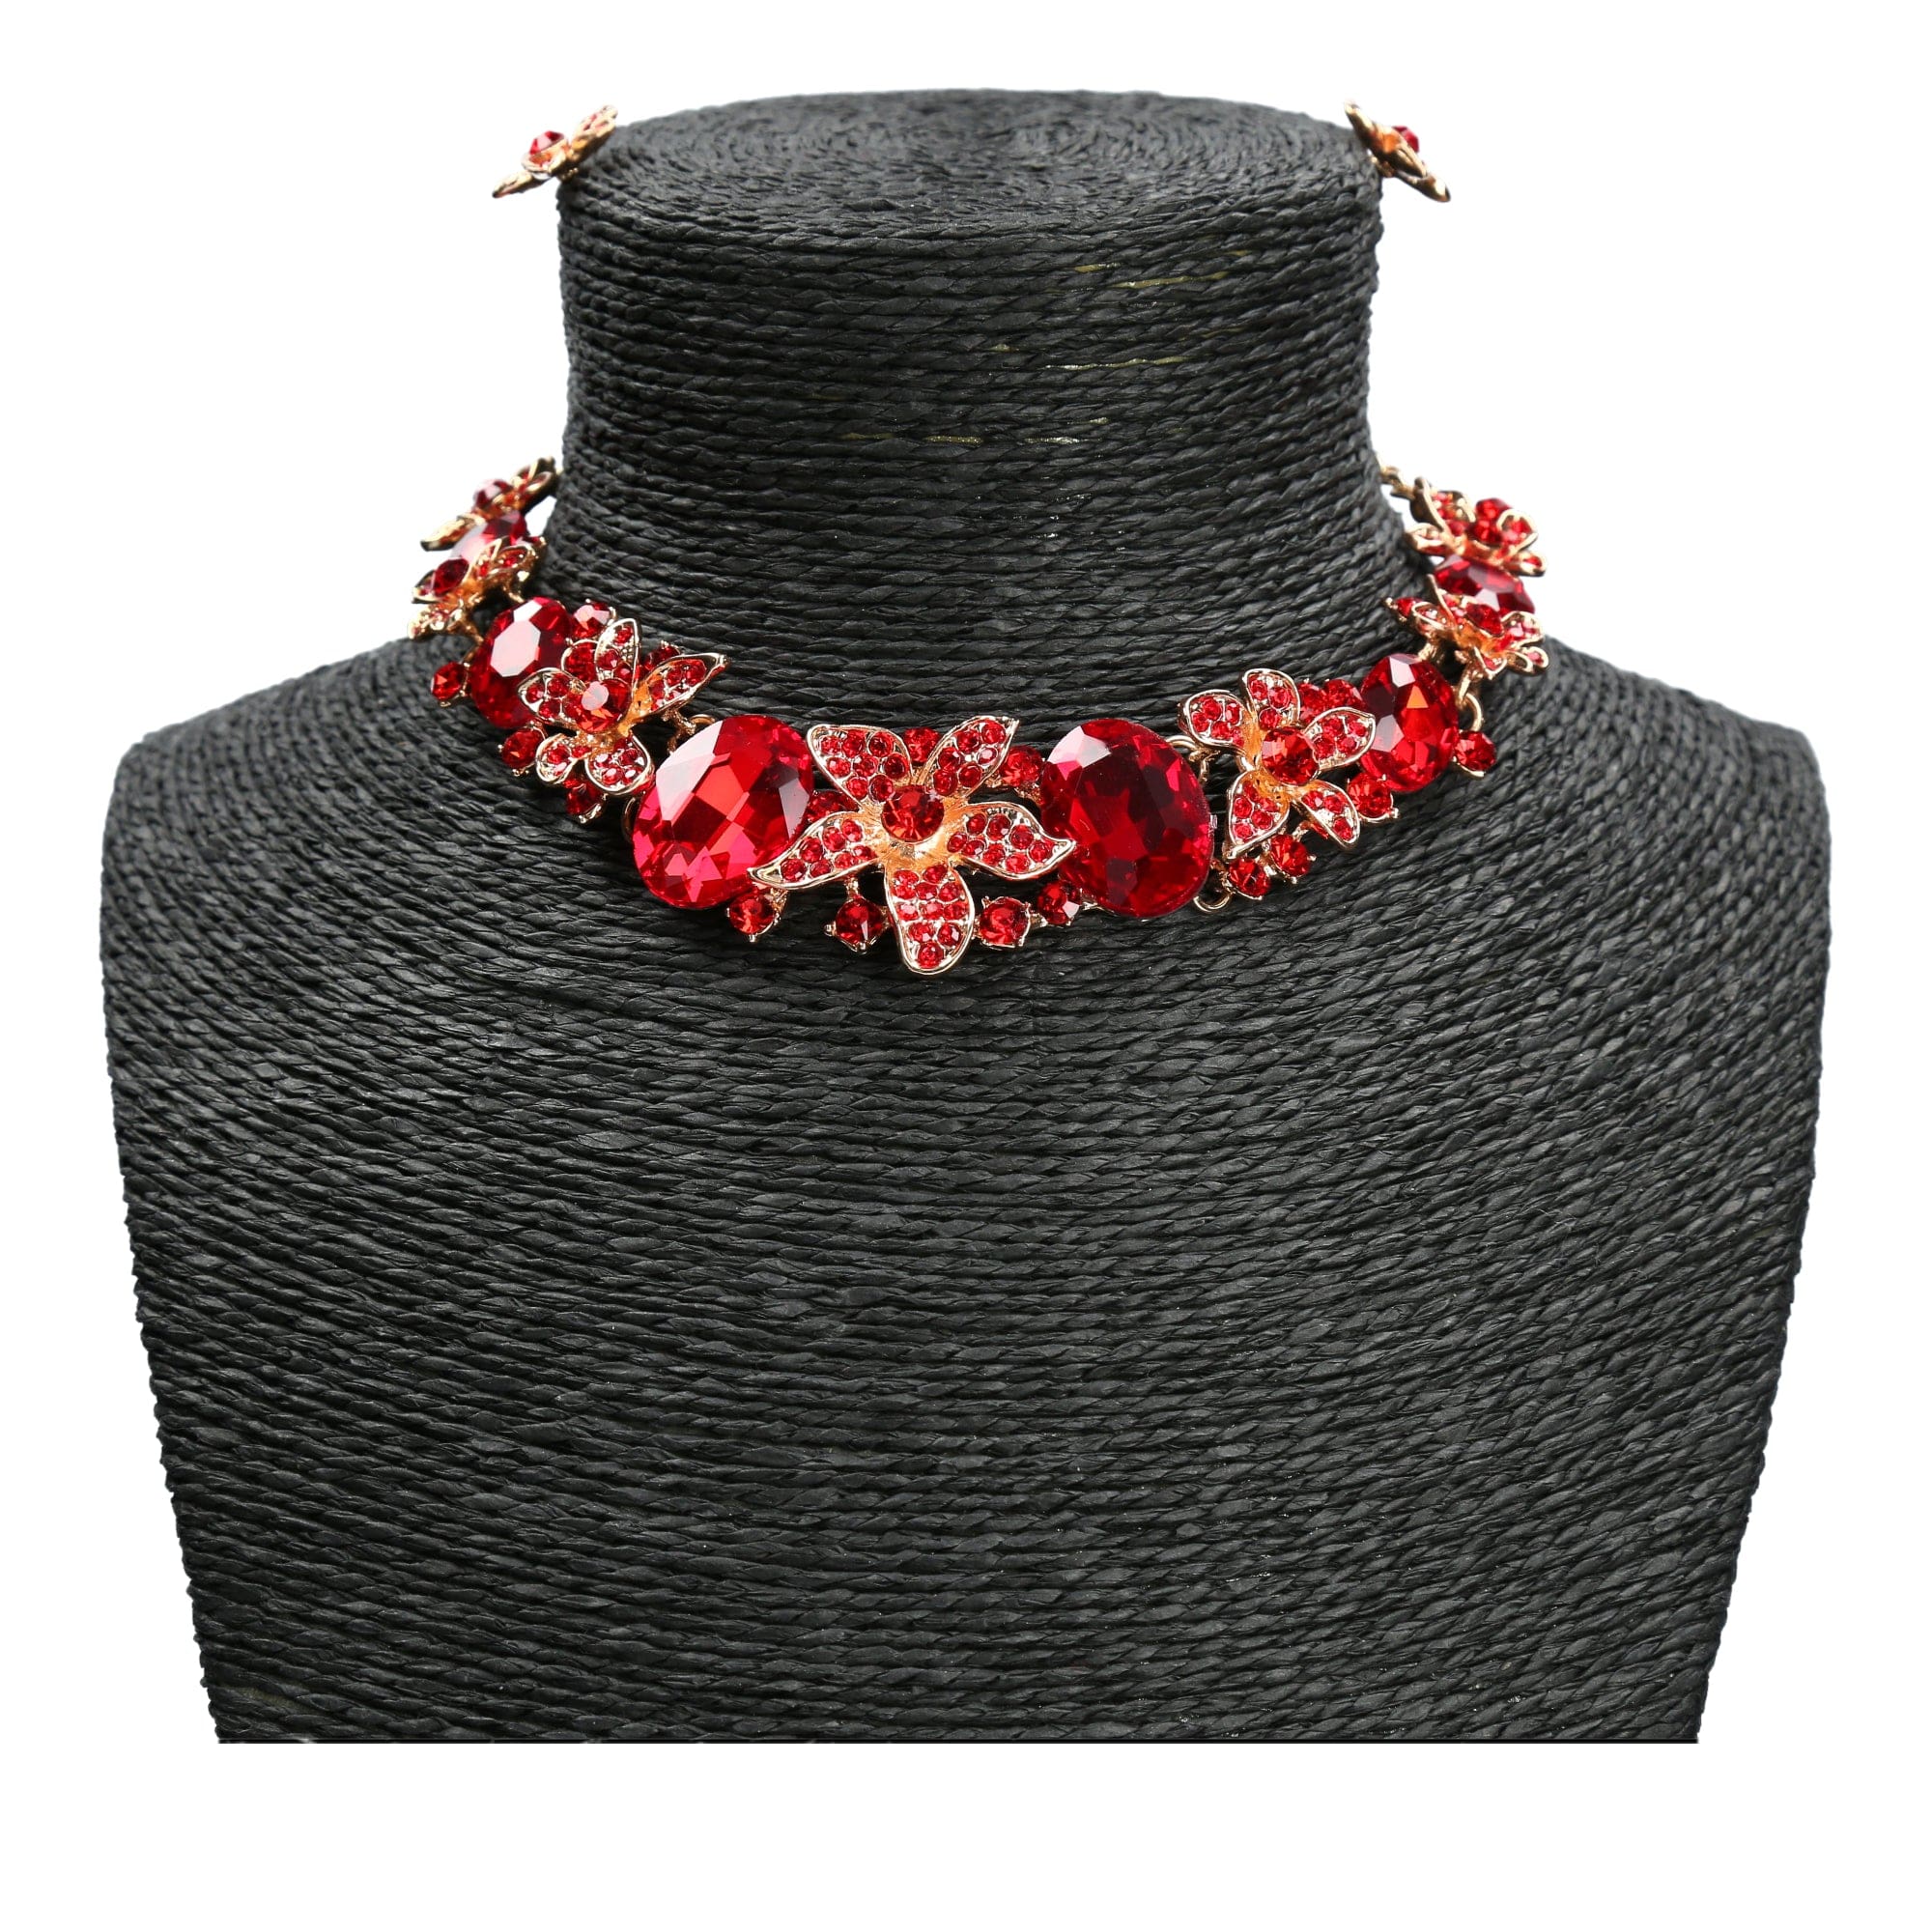 Charles jewelry set - Red - Necklace